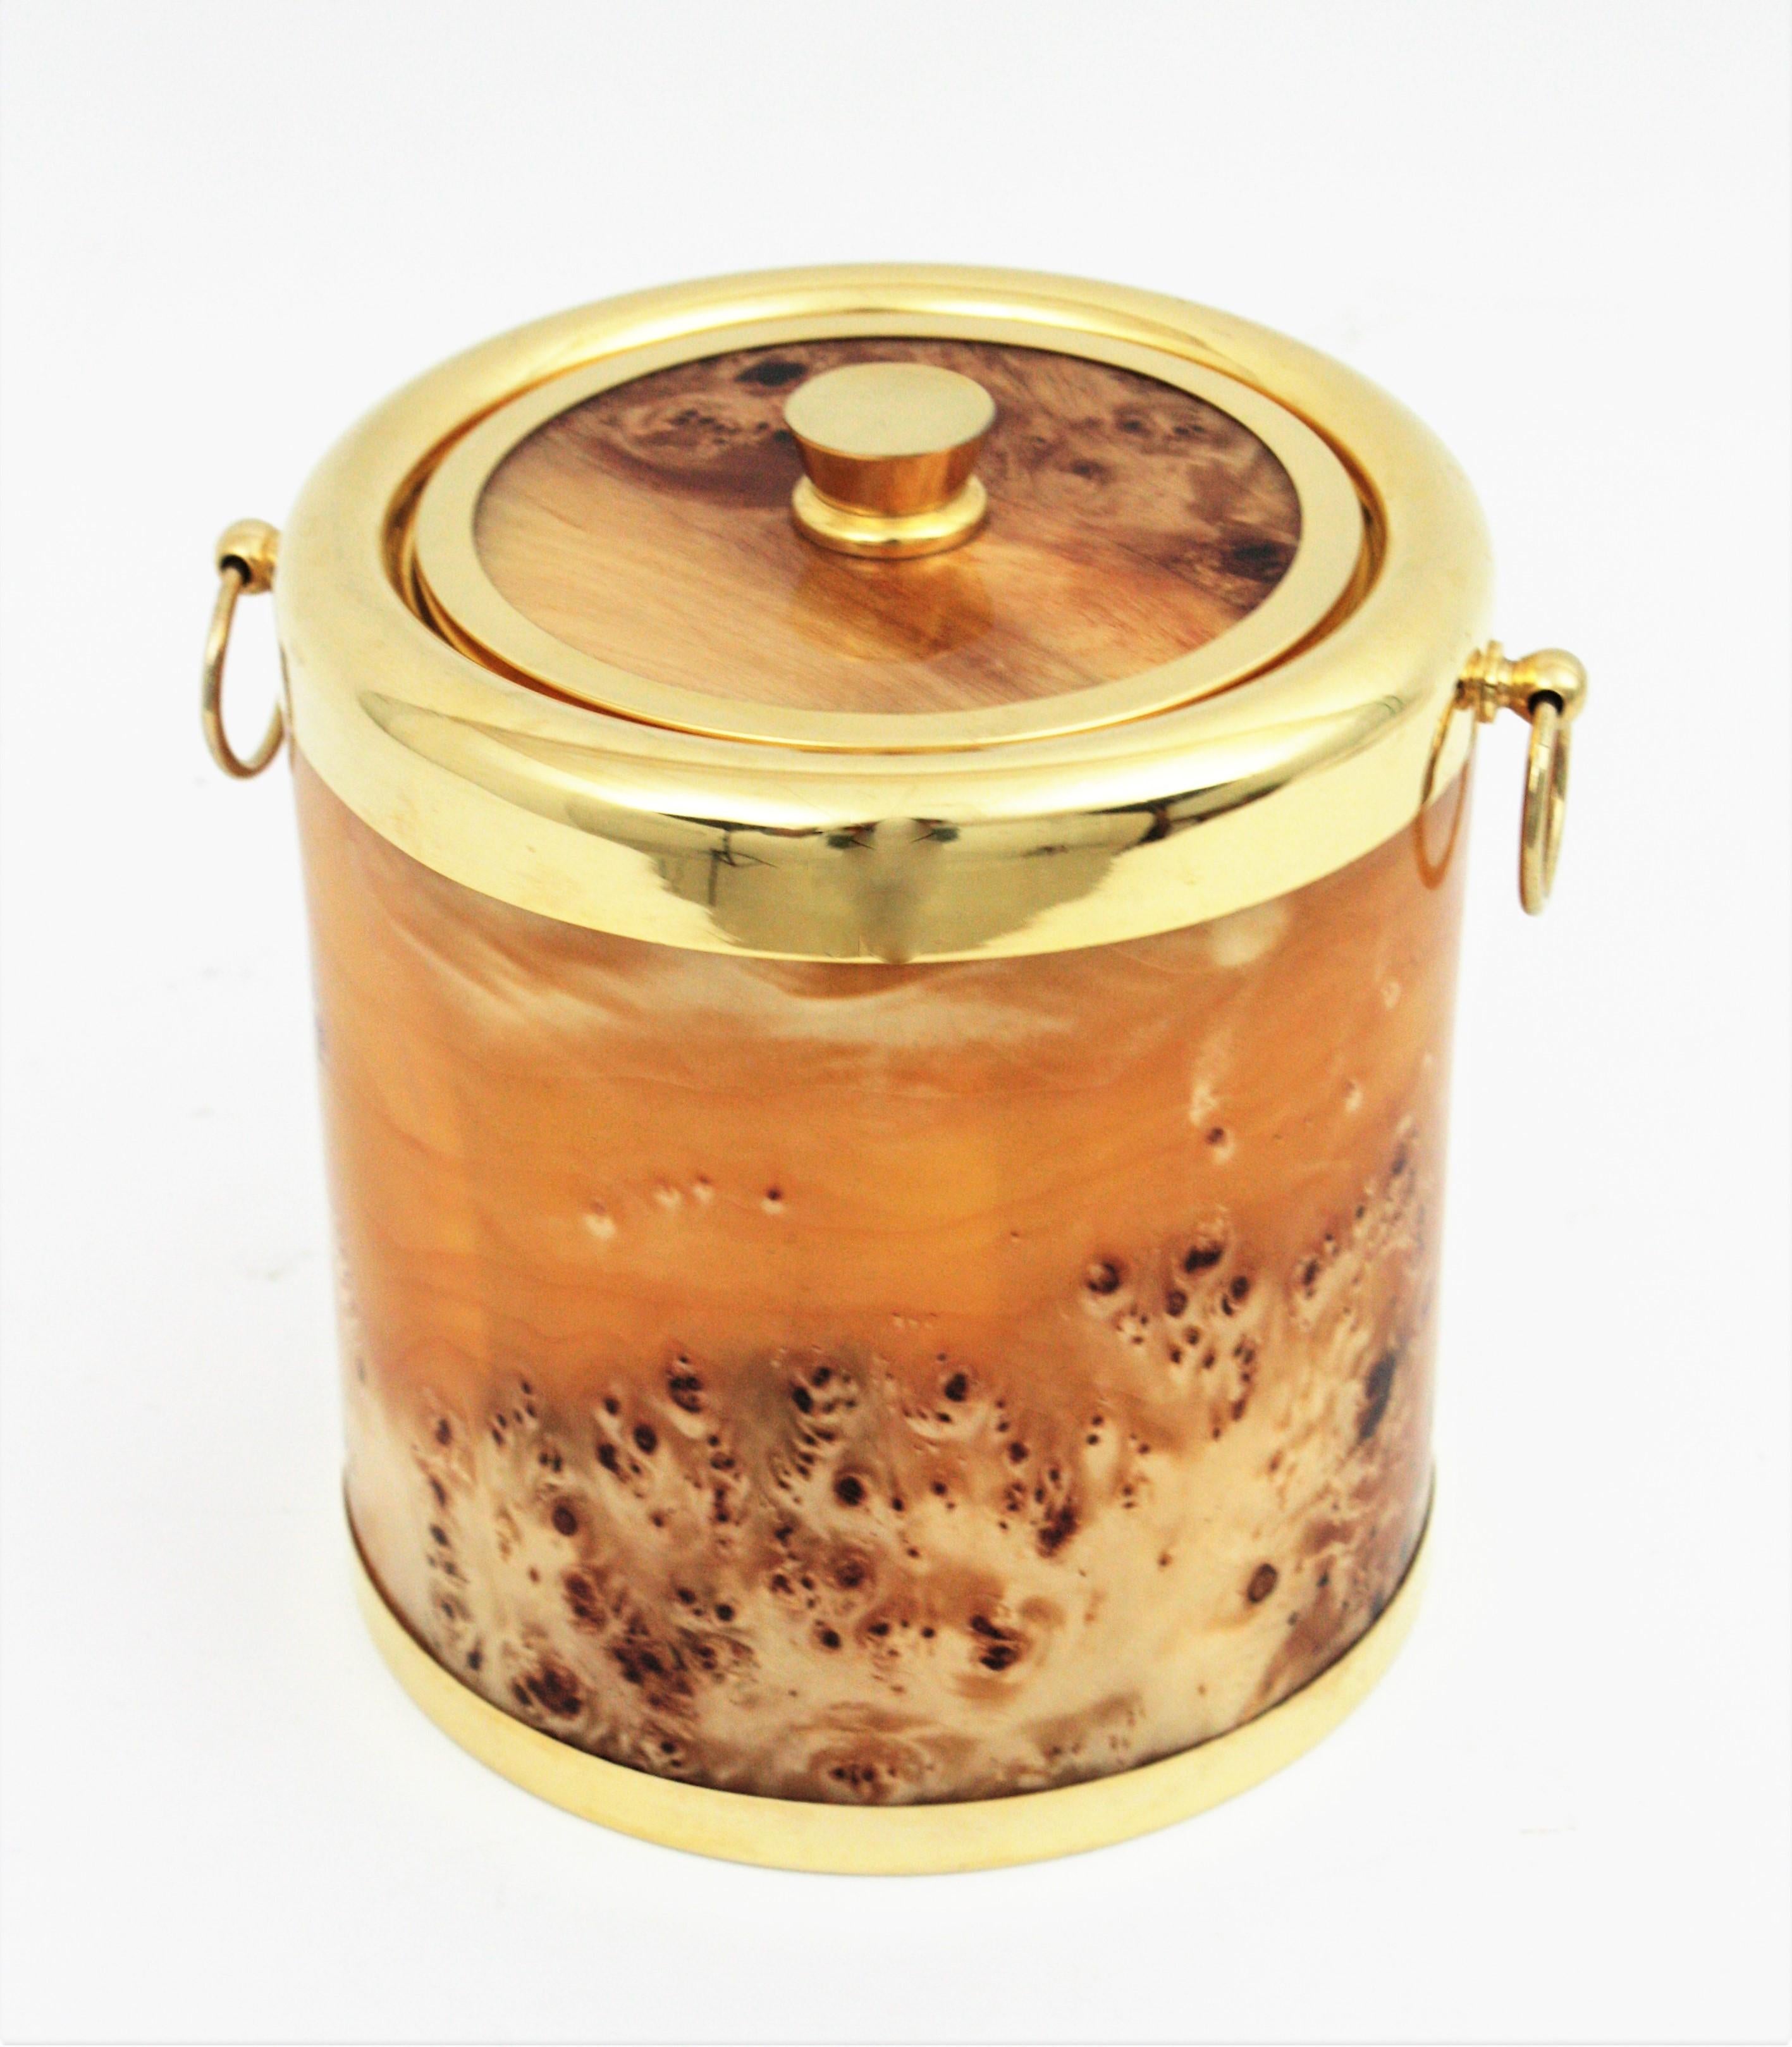 Handsome Mid-Century Modern burl wood and metal ice bucket with handles. Italy, 1960s.
This ice bucket is comprised by a cylindrical container with lid, covered with burl wood and lucite and ring handles at both sides. It has accents in